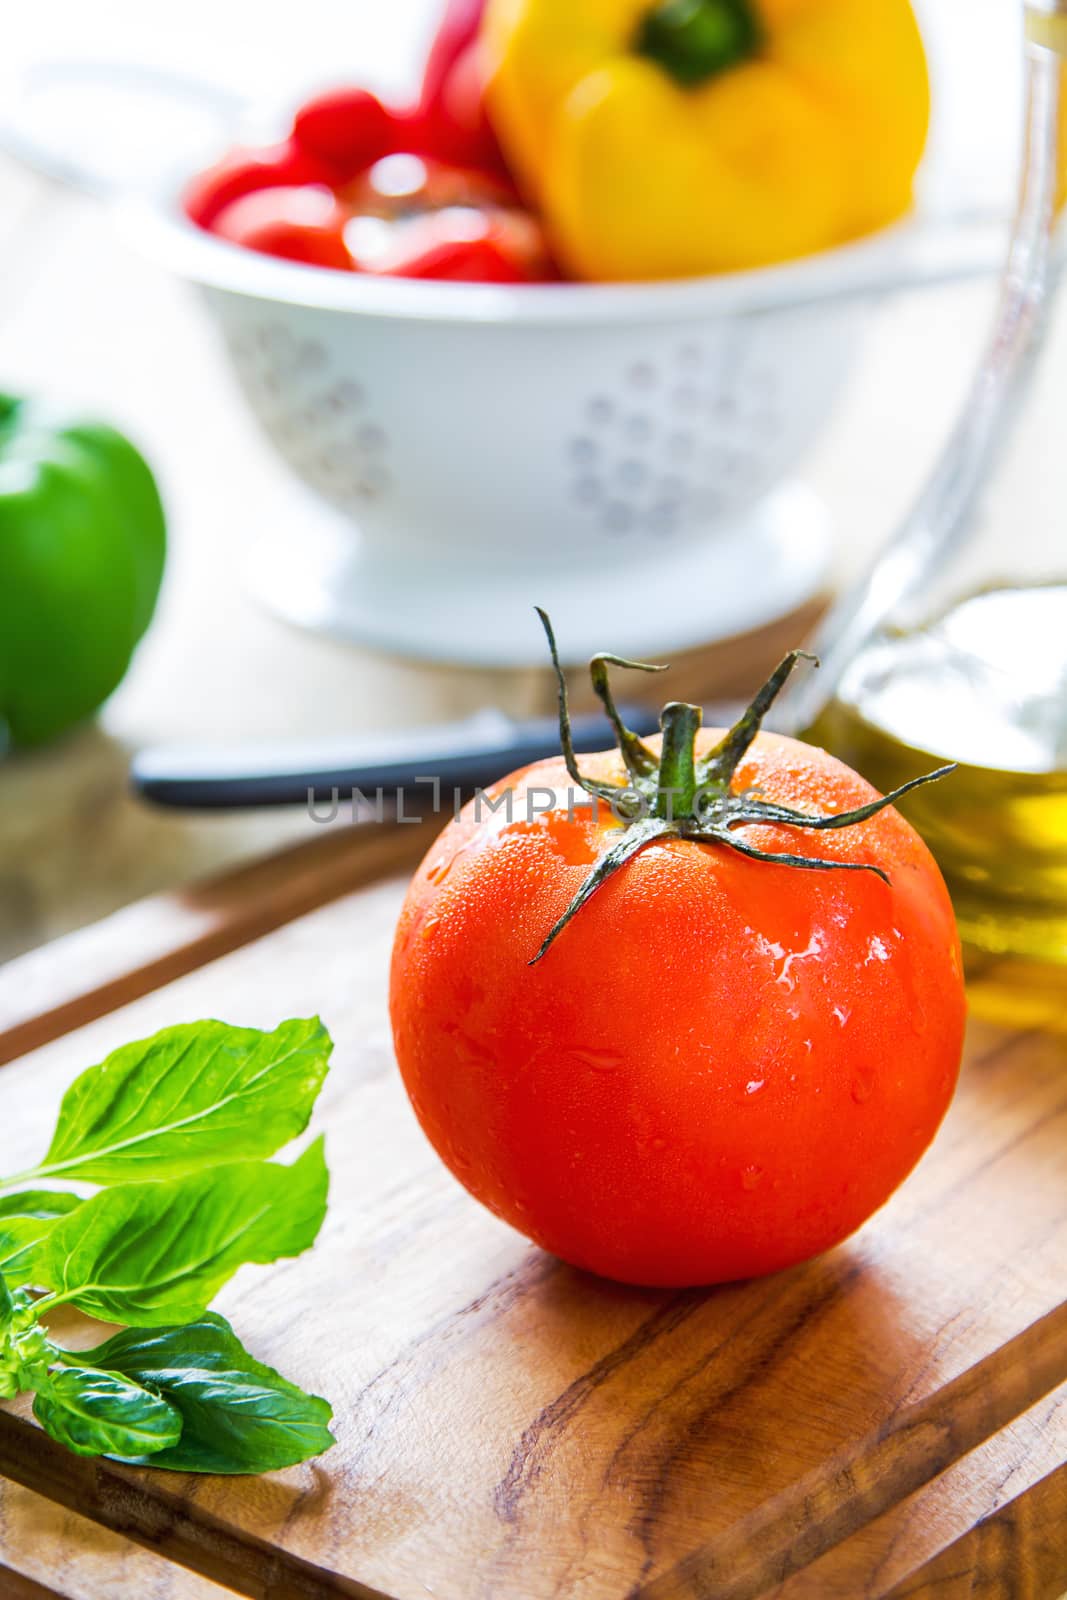 Tomato,Basil and colorful Bell pepper as ingredient for cooking